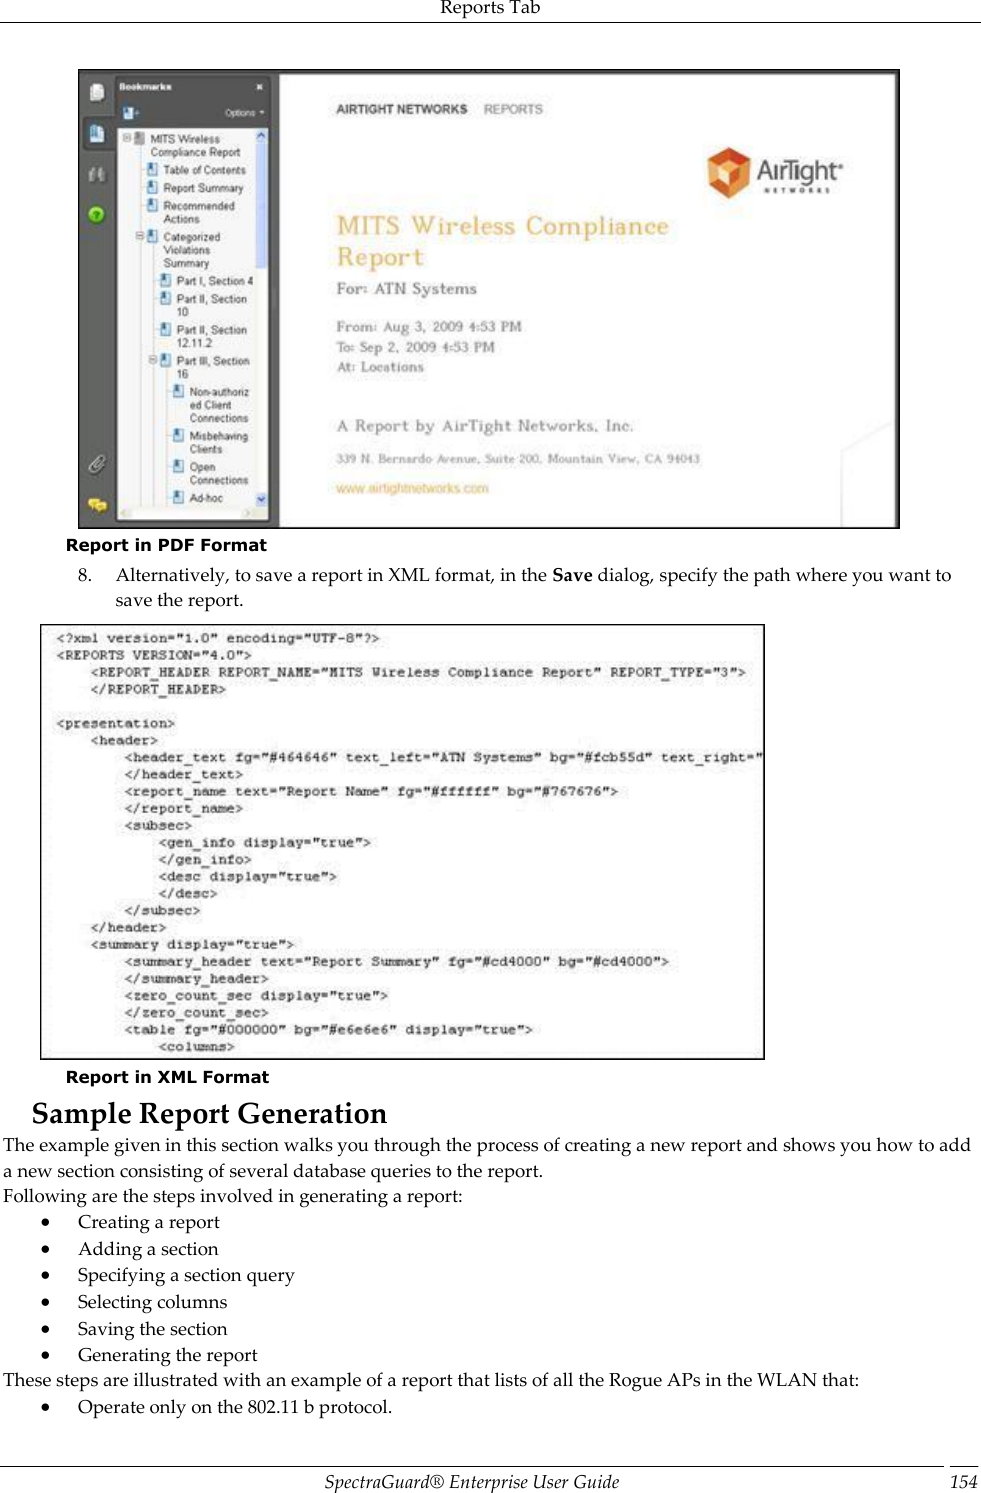 Reports Tab SpectraGuard®  Enterprise User Guide 154  Report in PDF Format 8. Alternatively, to save a report in XML format, in the Save dialog, specify the path where you want to save the report.  Report in XML Format Sample Report Generation The example given in this section walks you through the process of creating a new report and shows you how to add a new section consisting of several database queries to the report. Following are the steps involved in generating a report:  Creating a report  Adding a section  Specifying a section query  Selecting columns  Saving the section  Generating the report These steps are illustrated with an example of a report that lists of all the Rogue APs in the WLAN that:  Operate only on the 802.11 b protocol. 